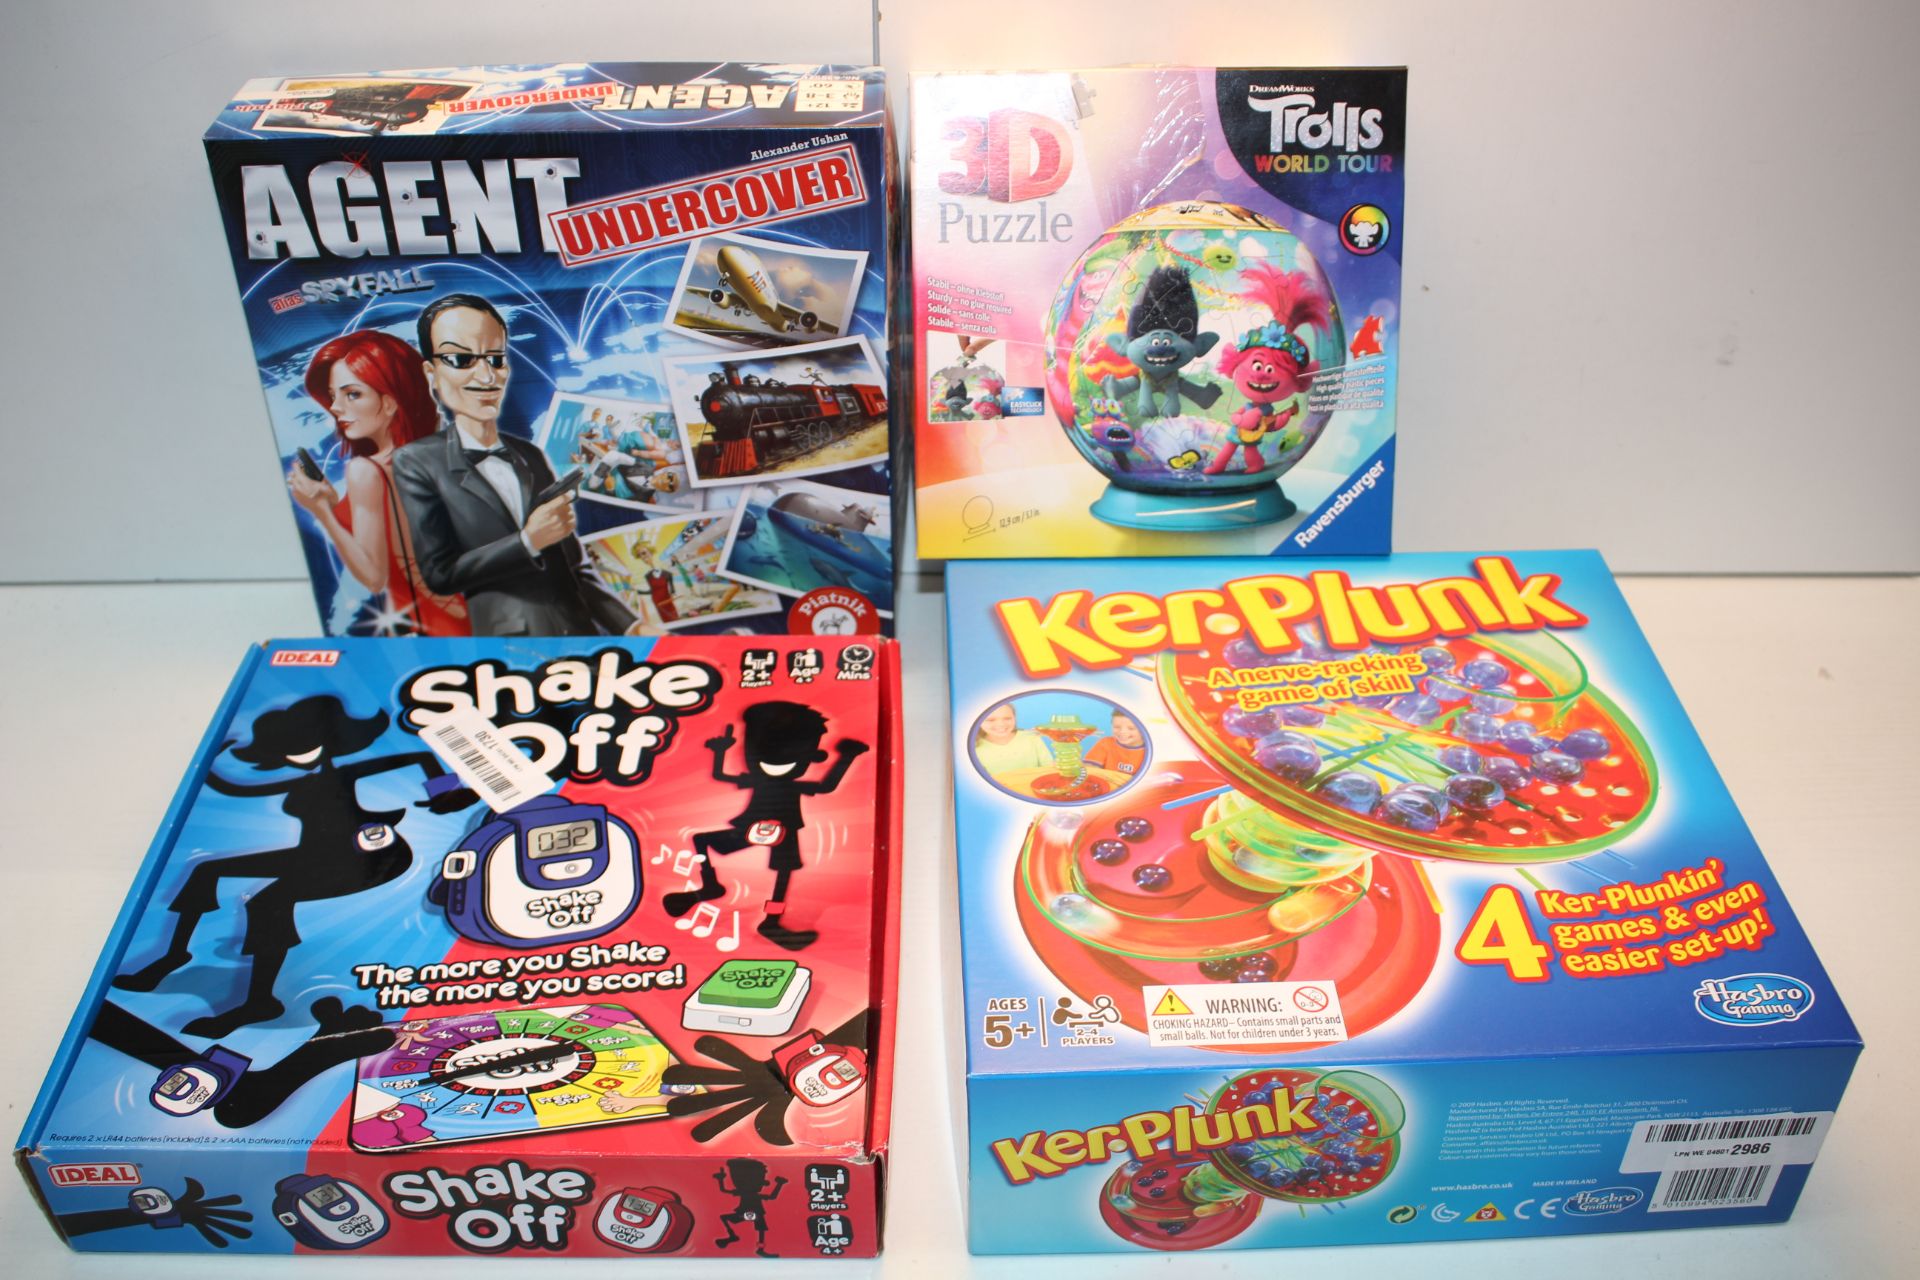 4X BOXED ASSORTED ITEMS TO INCLUDE KER-PLUNK, AGENT UNDERCOVER & OTHER (IMAGE DEPICTS STOCK)